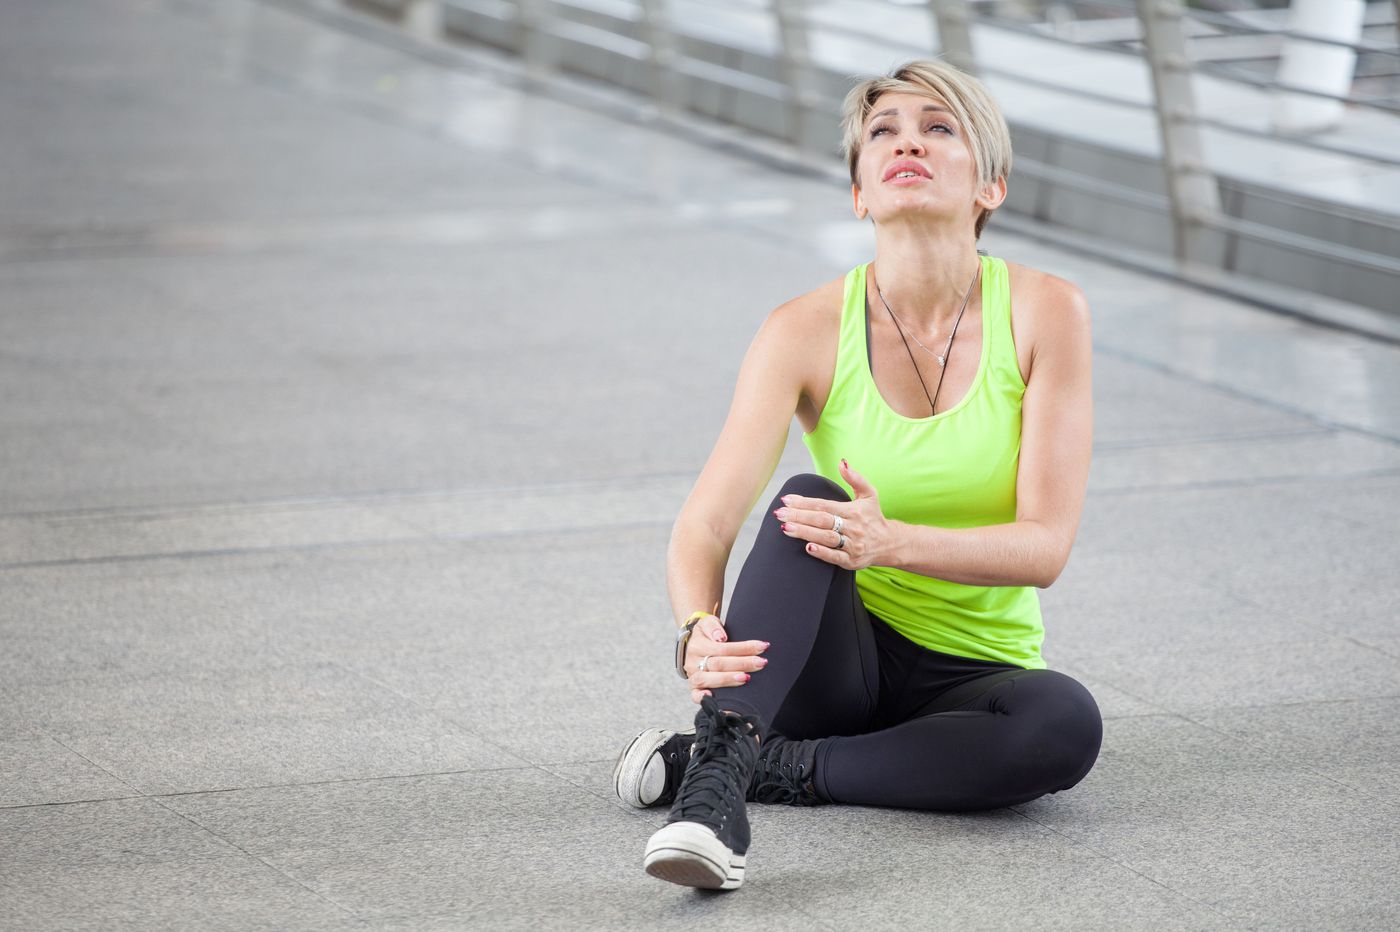 Getting Leg Pain After Running? Here is What to Know